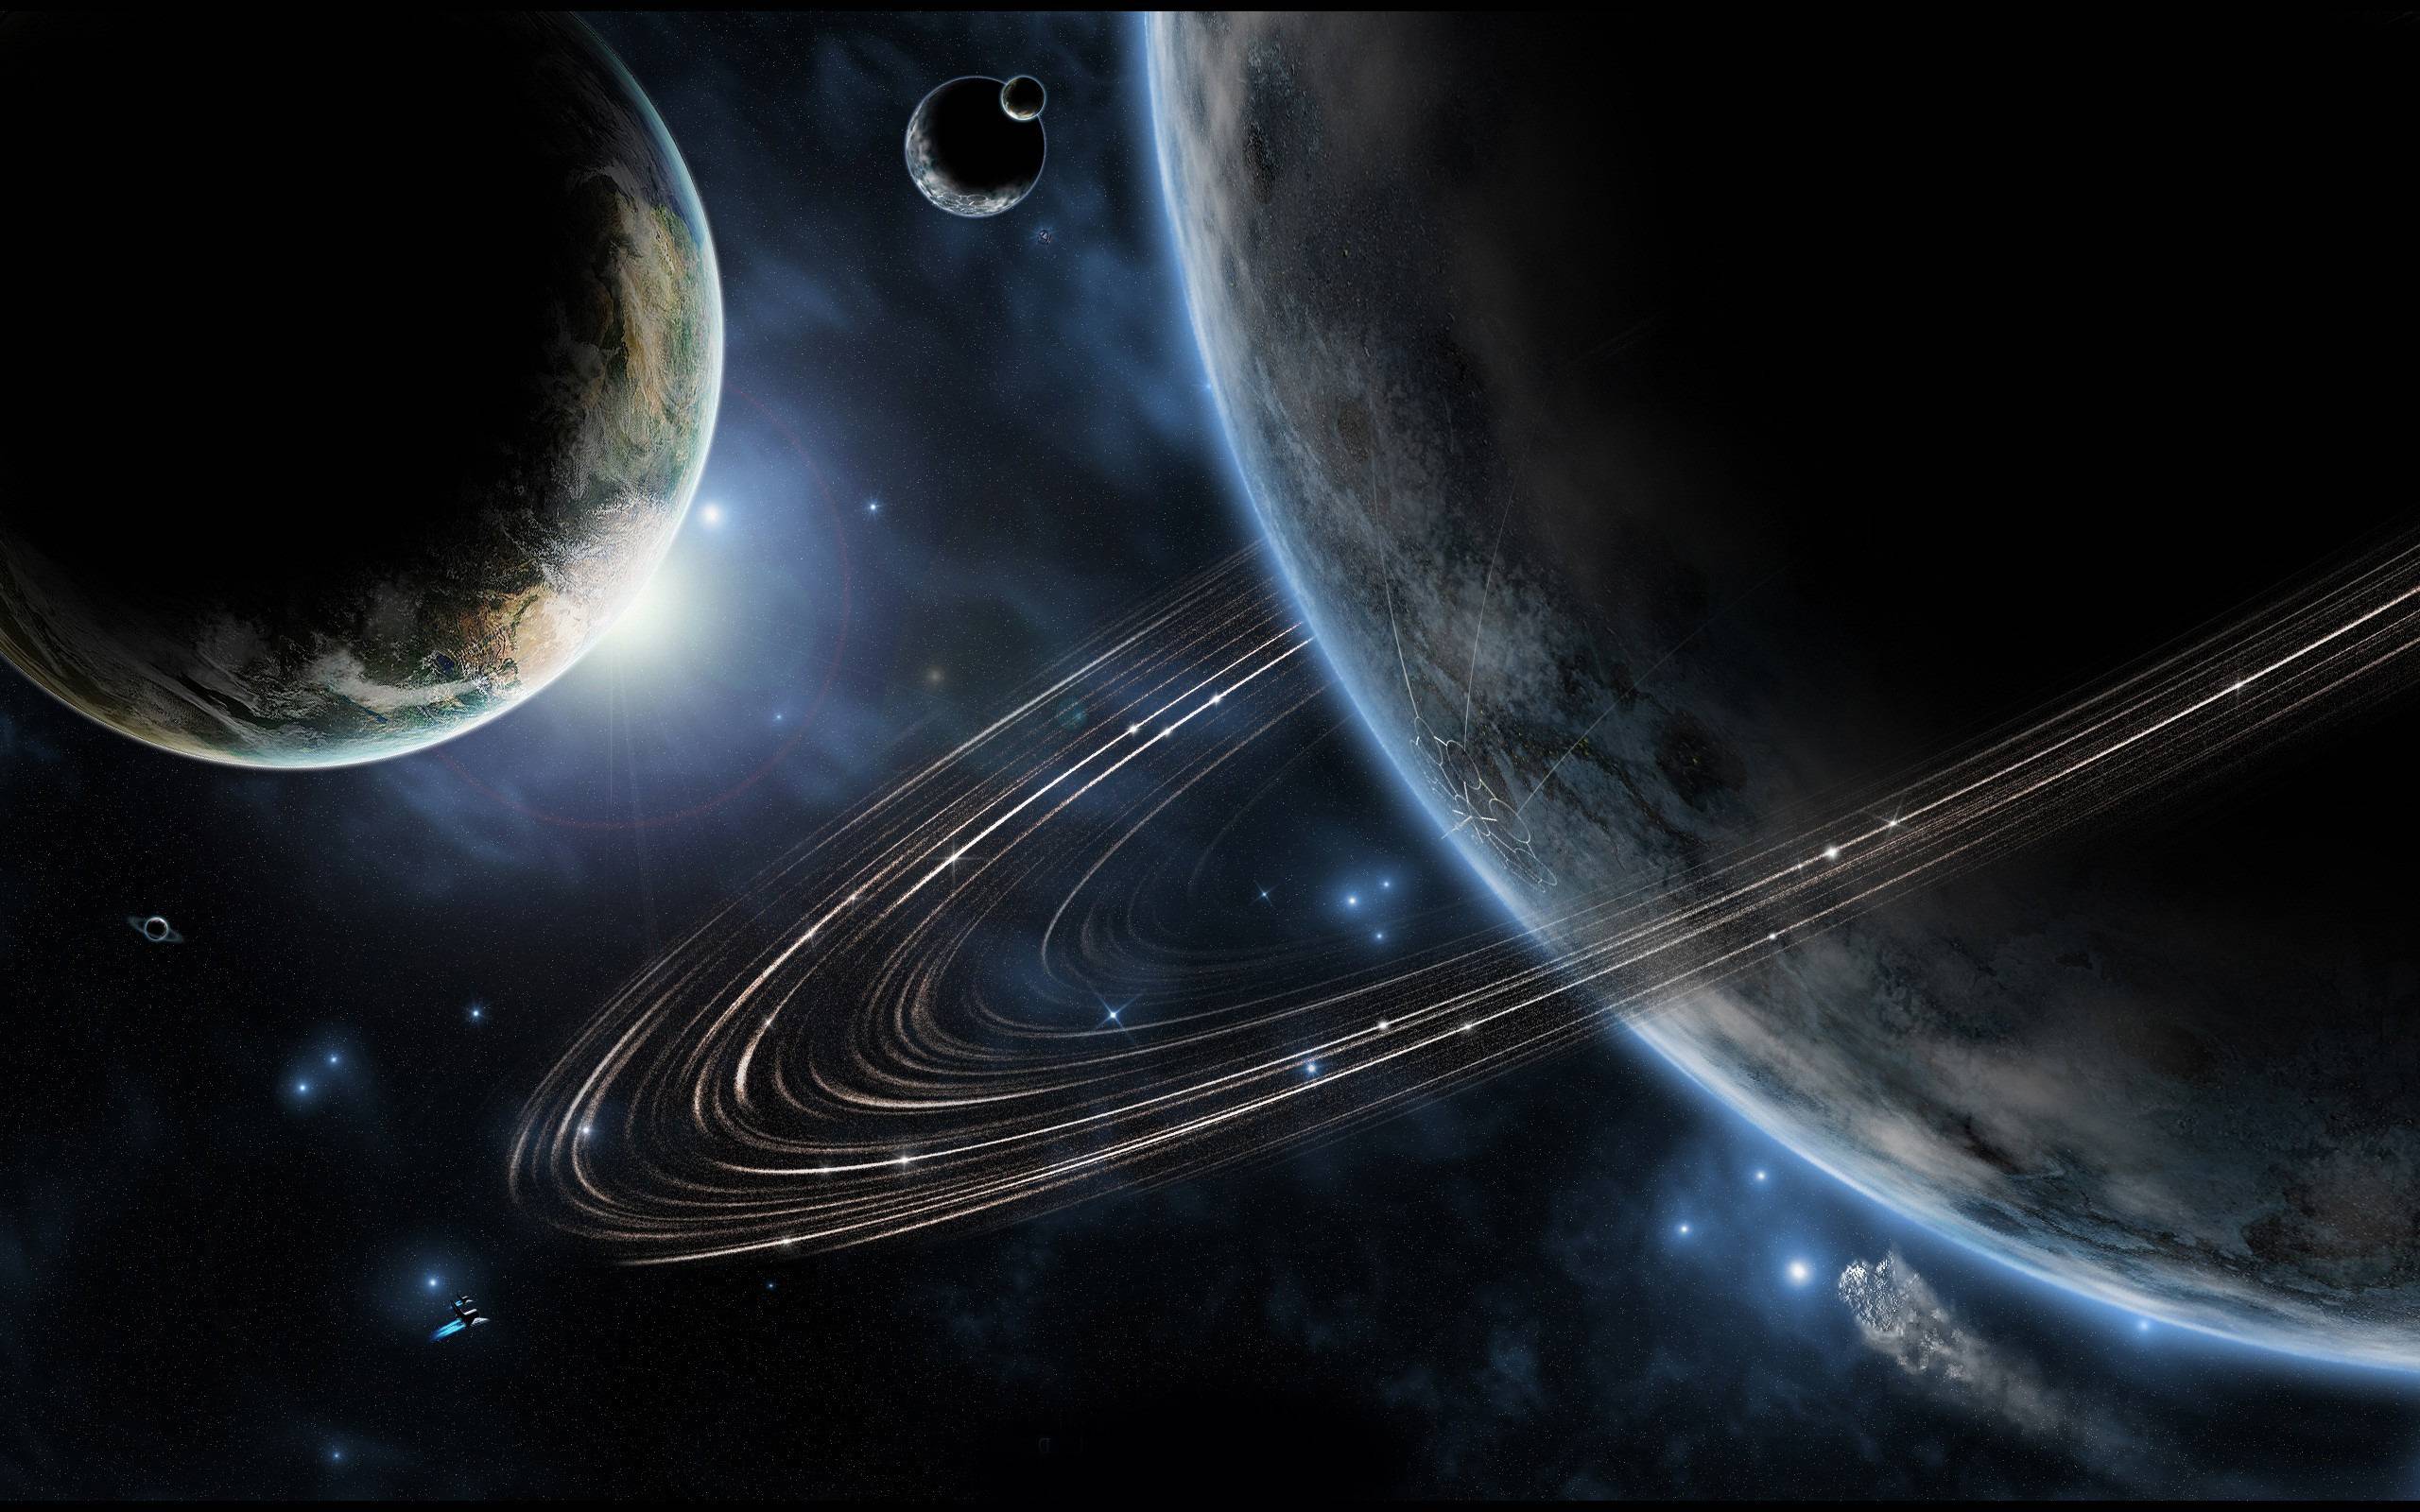 4k Ultra Hd Planets Wallpapers Top Free 4k Ultra Hd Planets 8339